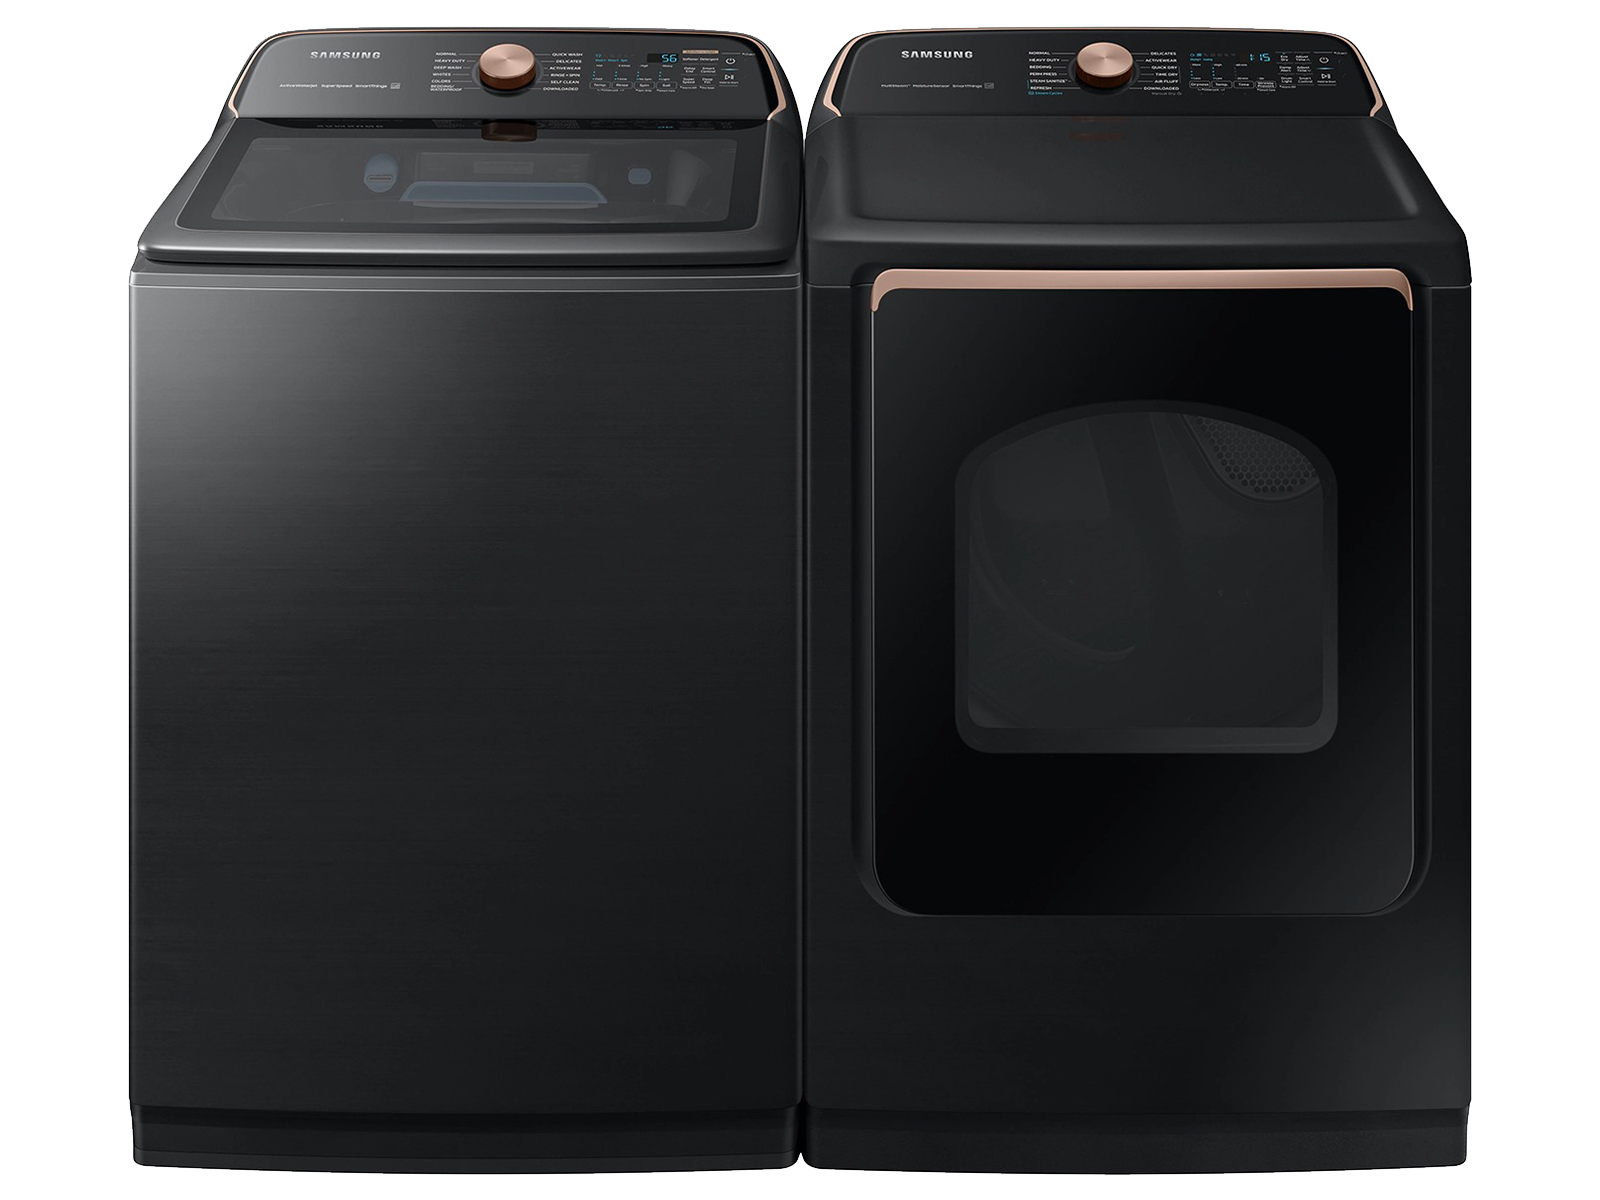 Photos - Tumble Dryer Samsung Smart Top Load Smart Washer and Steam Sanitize+ Electric Dryer pac 